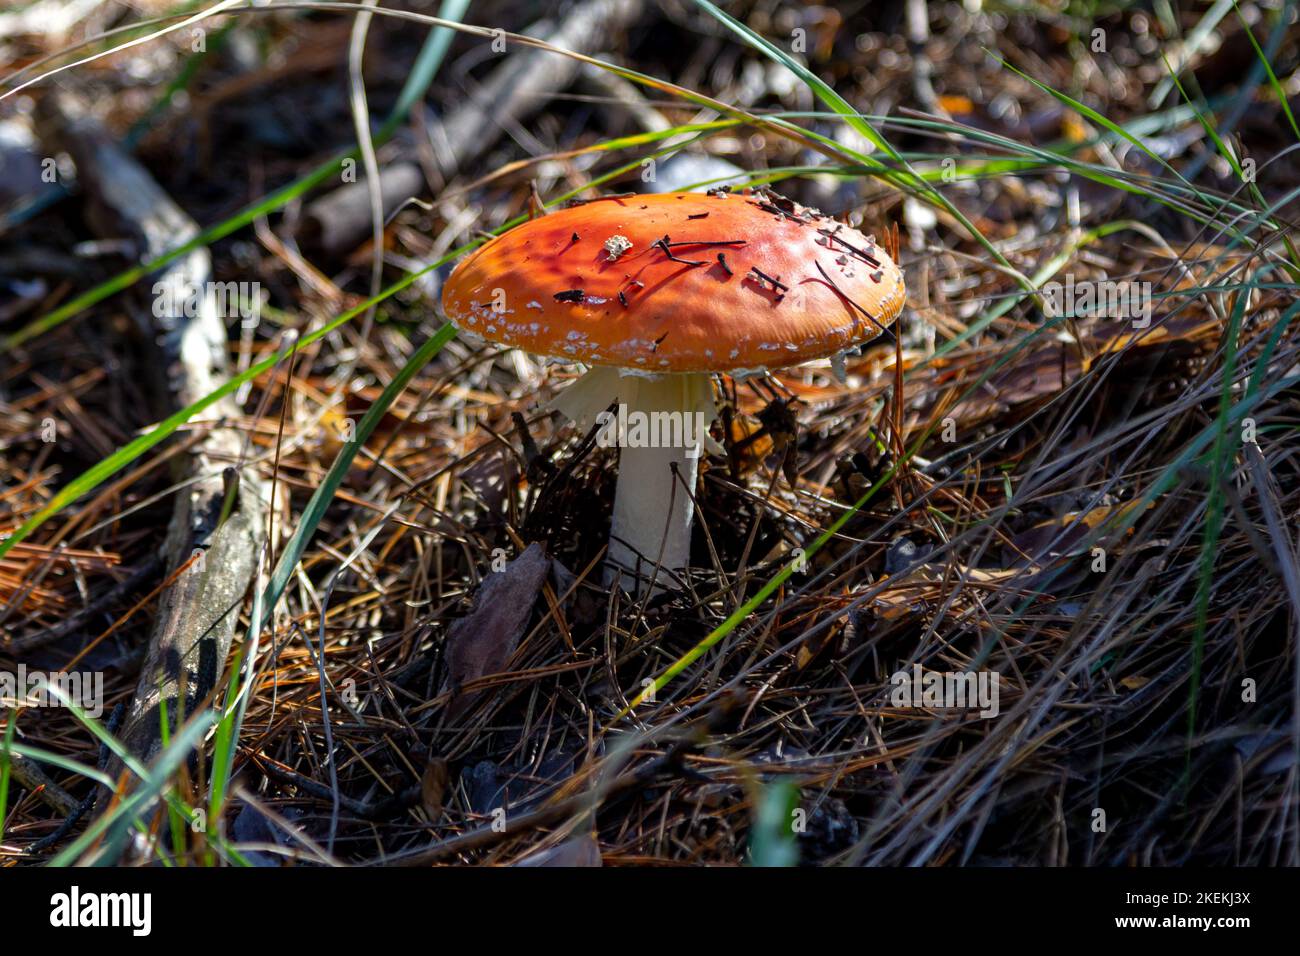 Fly agaric mushroom with red hat growing in a forest Stock Photo